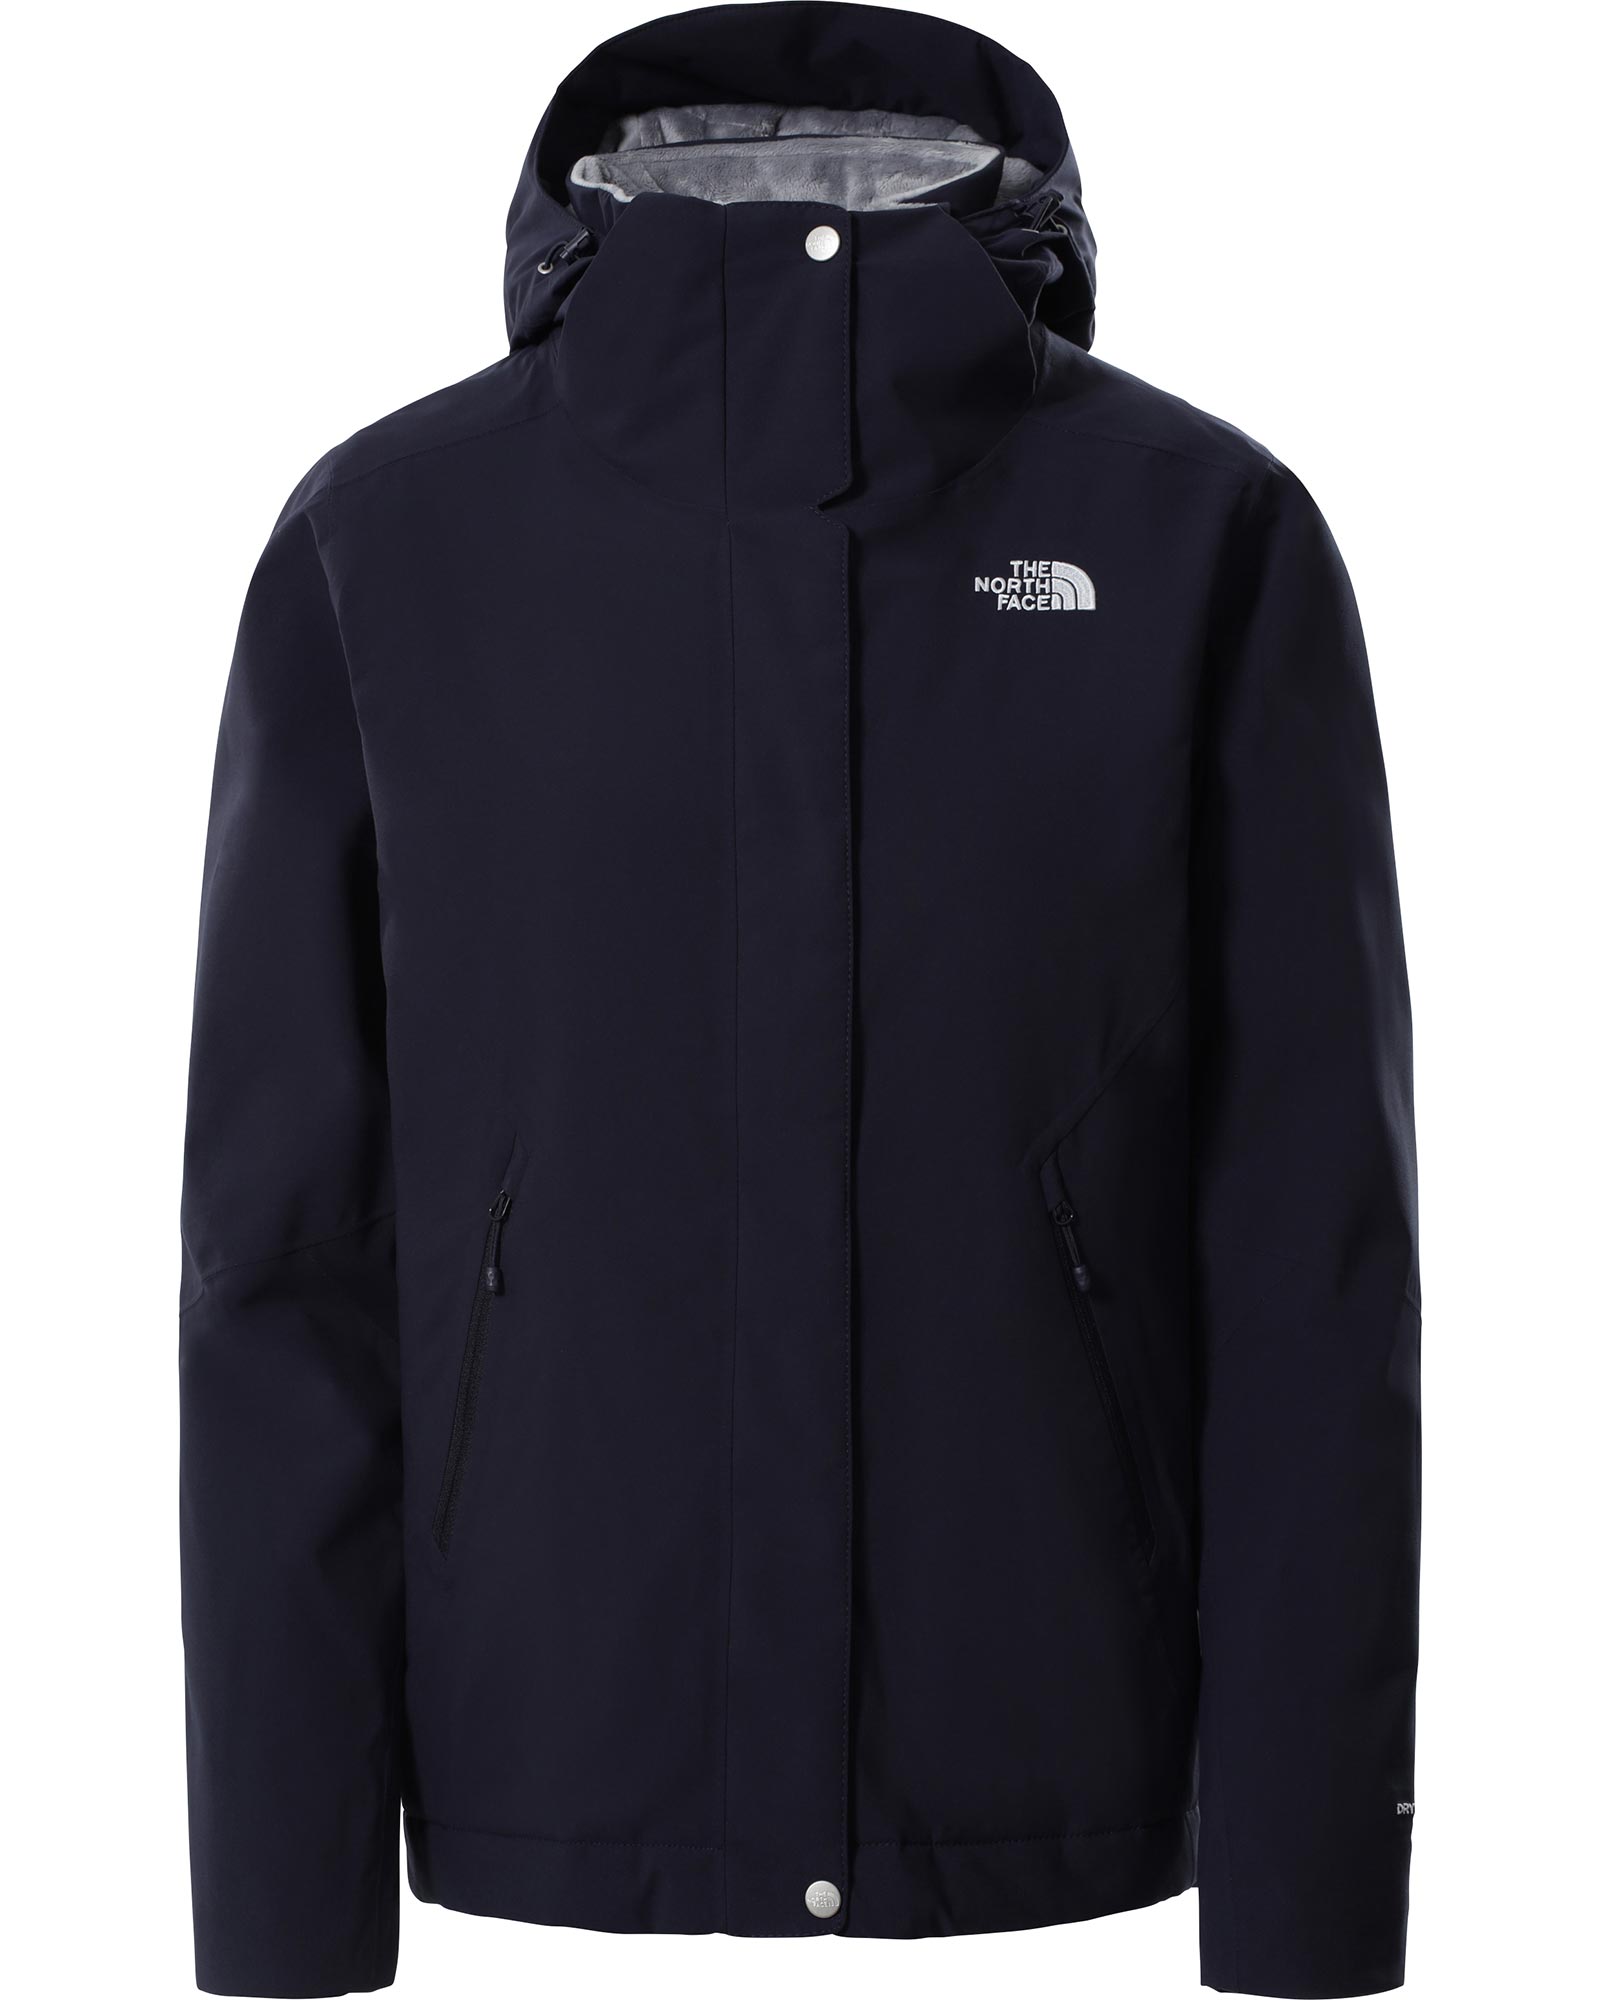 The North Face Inlux Insulated DryVent Women’s Insulated Jacket - Aviator Navy S